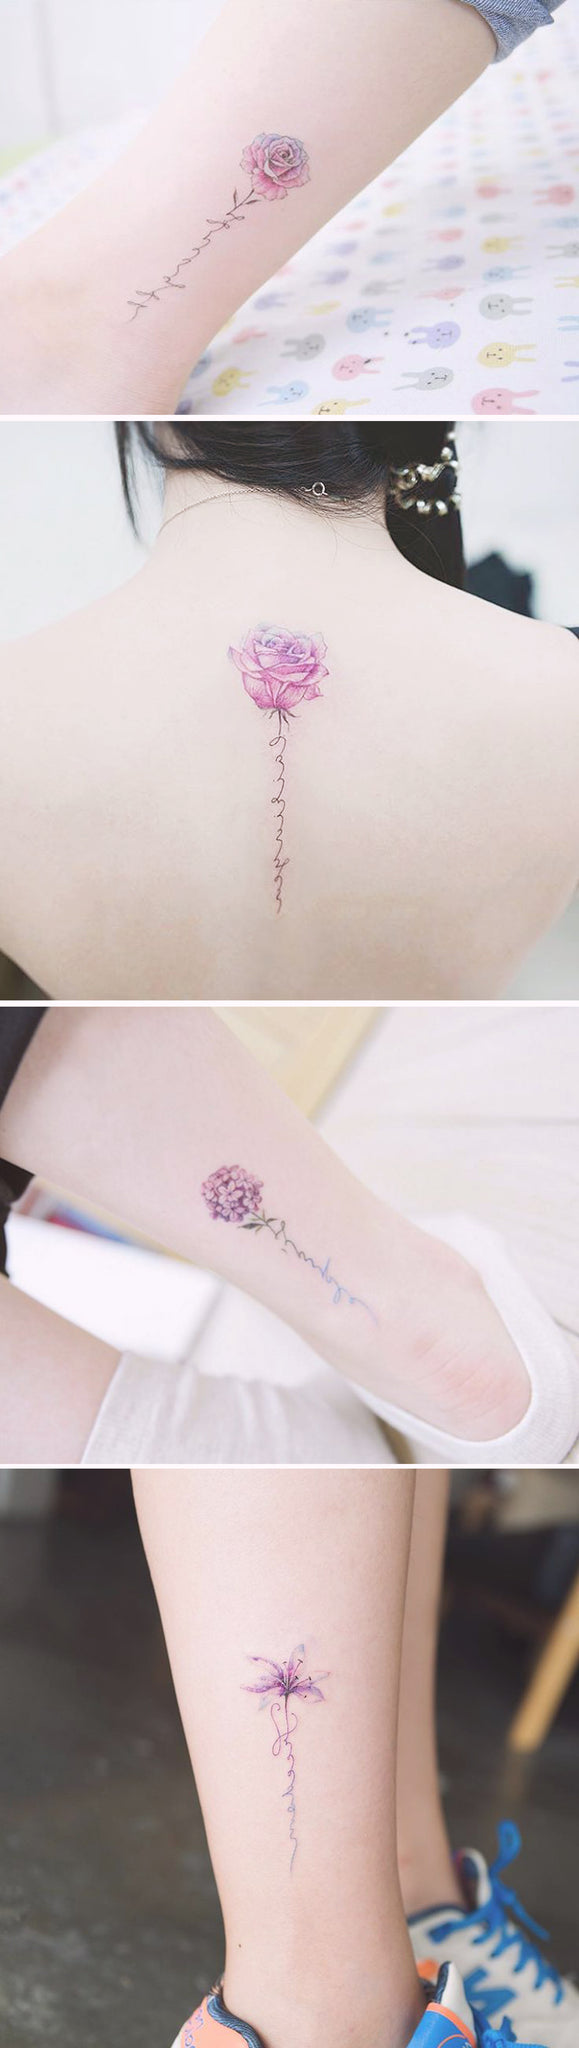 Delicate Watercolor Flower Spine Back Tattoo Ideas - Small Floral Lily Ankle Tatt - Floral Arm Wrist Tat - MyBodiArt.com